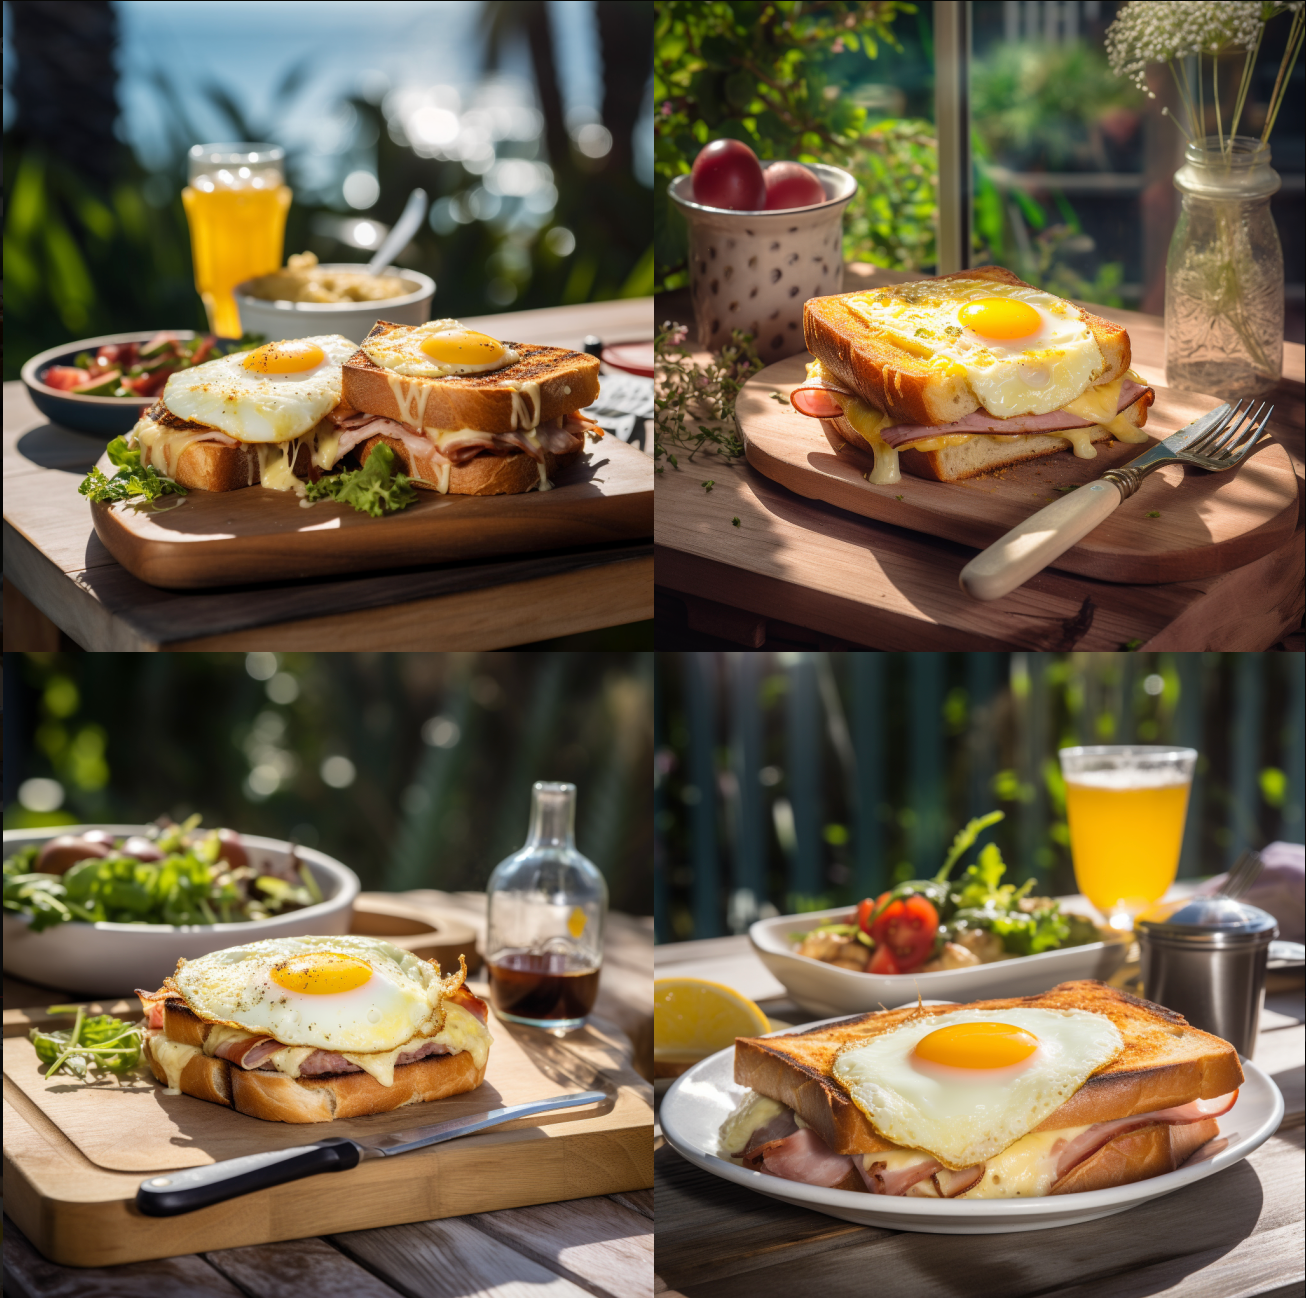 professional outdoor photography of a Croque monsieur with humble cheese, fried egg and ham toastie as a gourmet fare. presented in a typical french sunny atmosphere